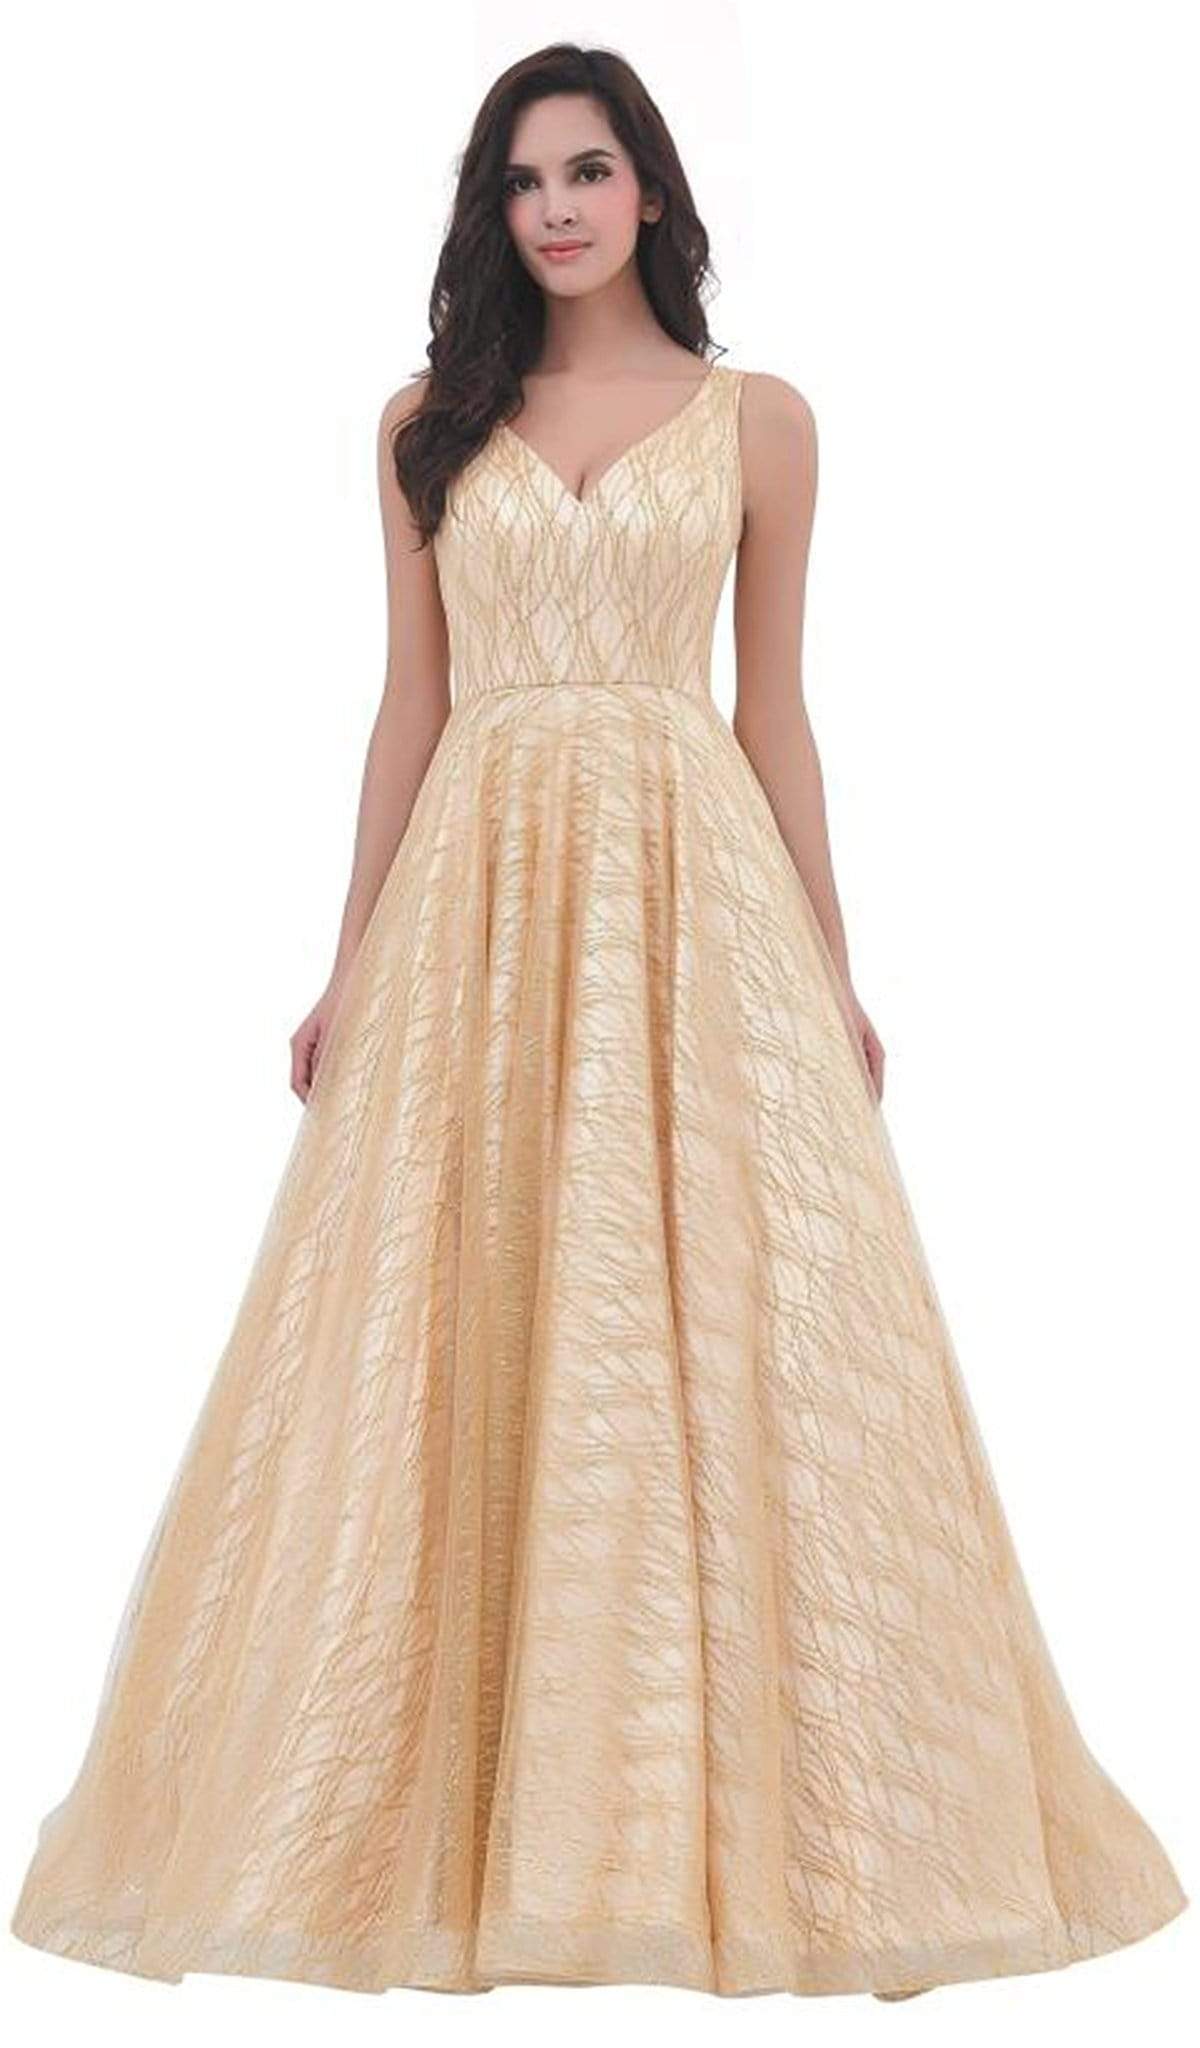 Jadore - J11311 Sleeveless V Neck Glitter Tulle Ballgown Special Occasion Dress 2 / Champagne